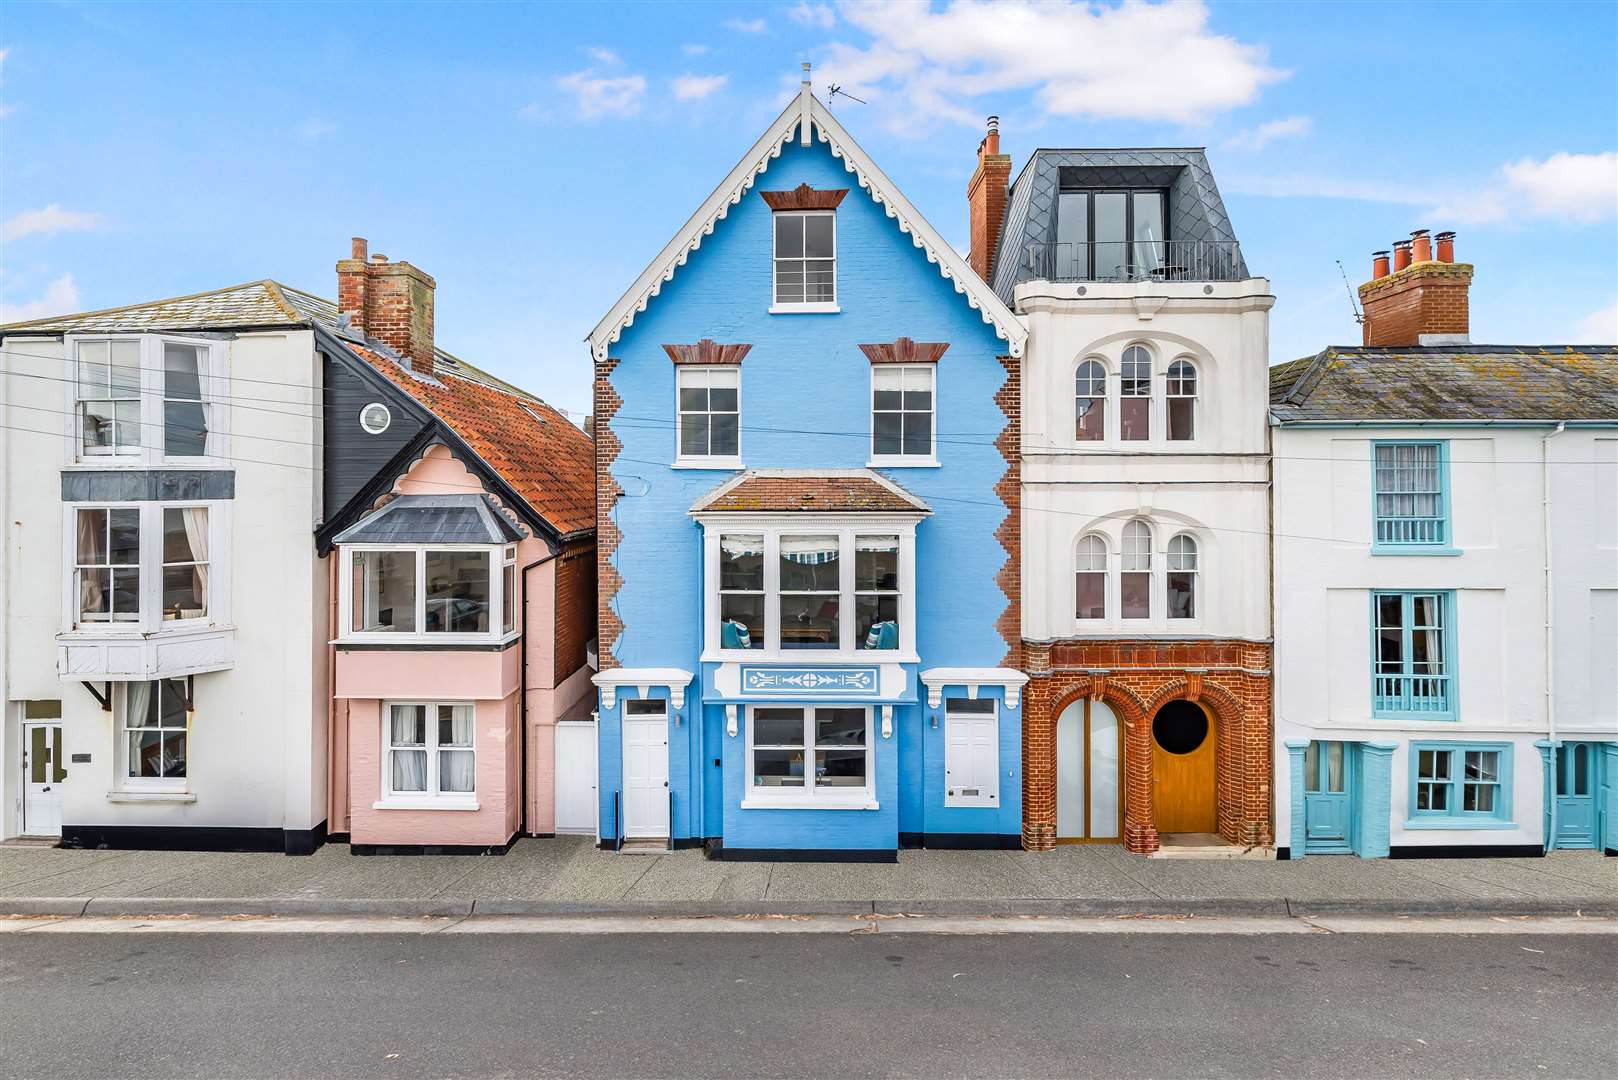 Orlando is an iconic townhouse in the coastal town of Aldeburgh. Pictures: Savills